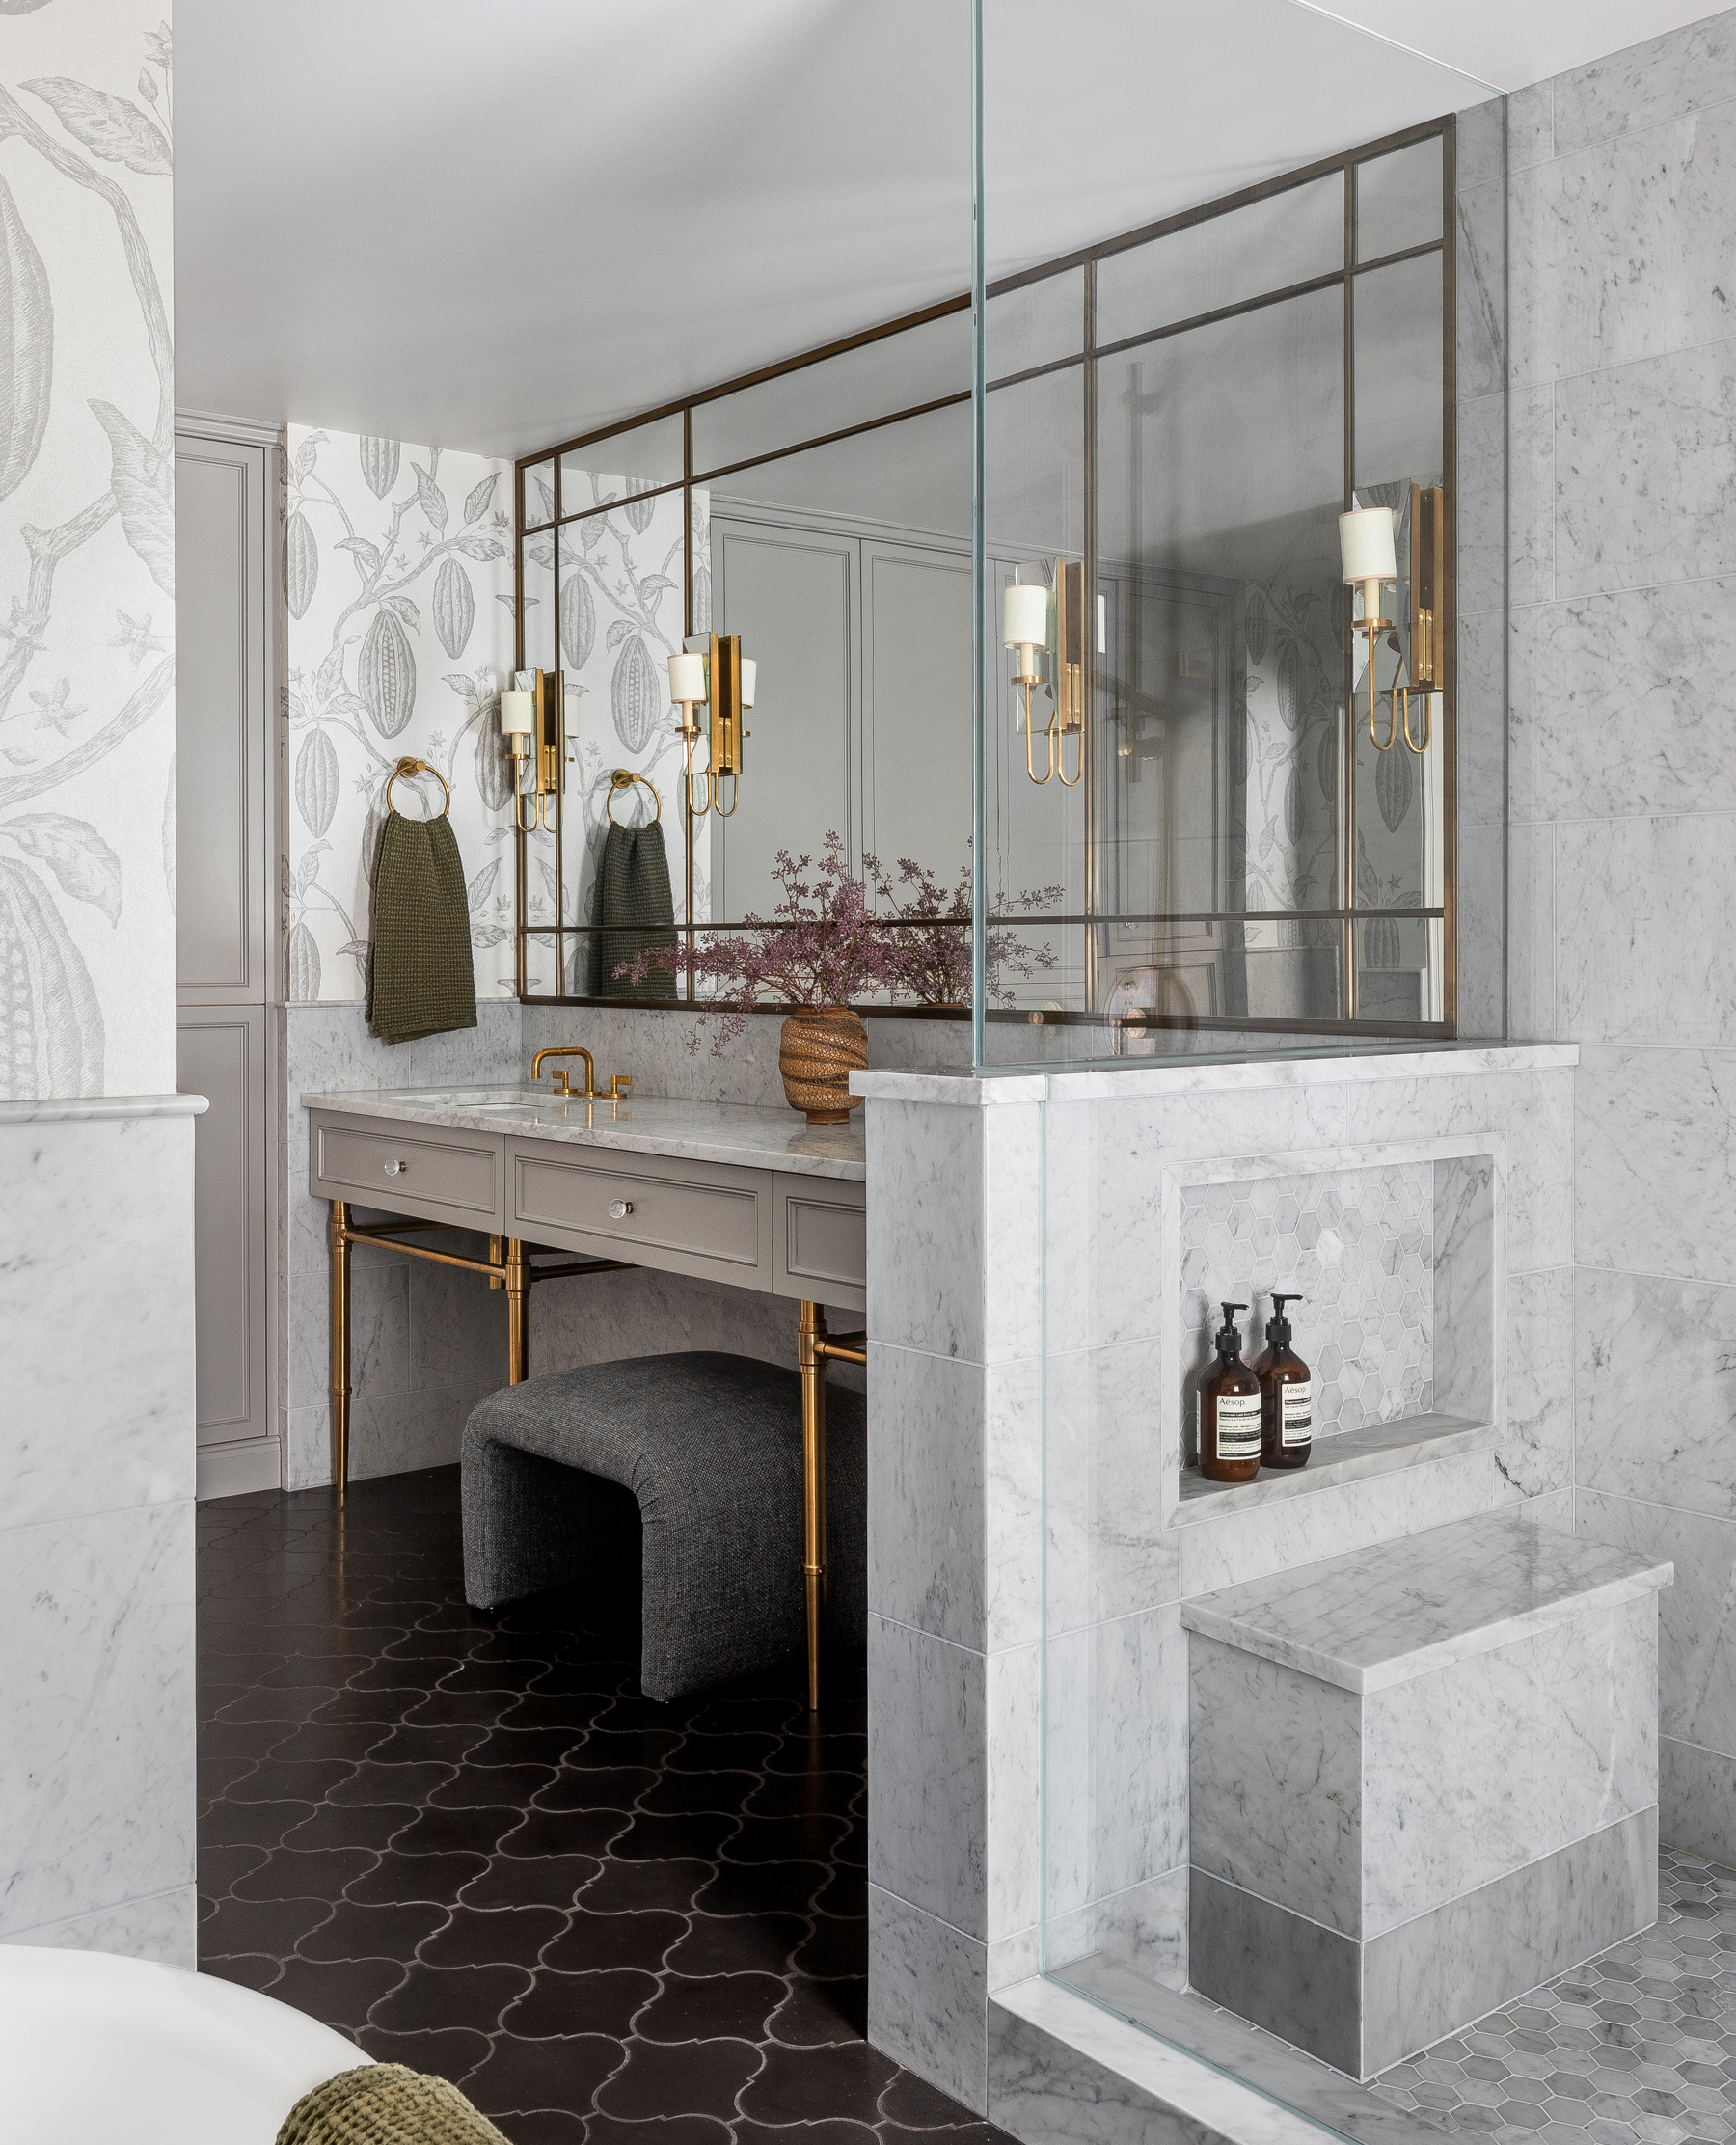 Marble and unlacquered brass in this bathroom create a classic feel. The brass will patina over time, adding to its timeless aesthetic.